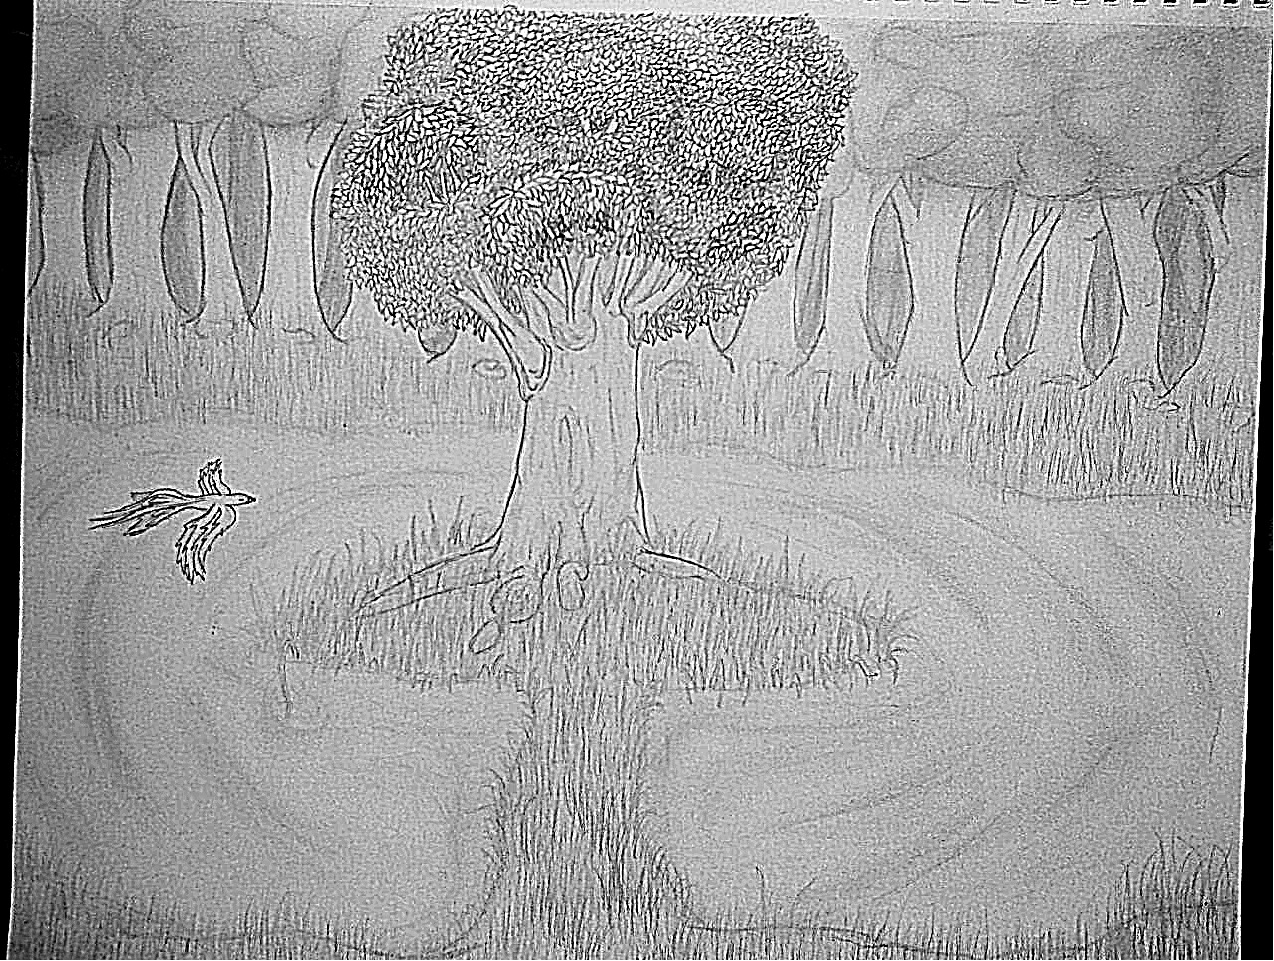 all done! the tree in a lake by Wishsayer